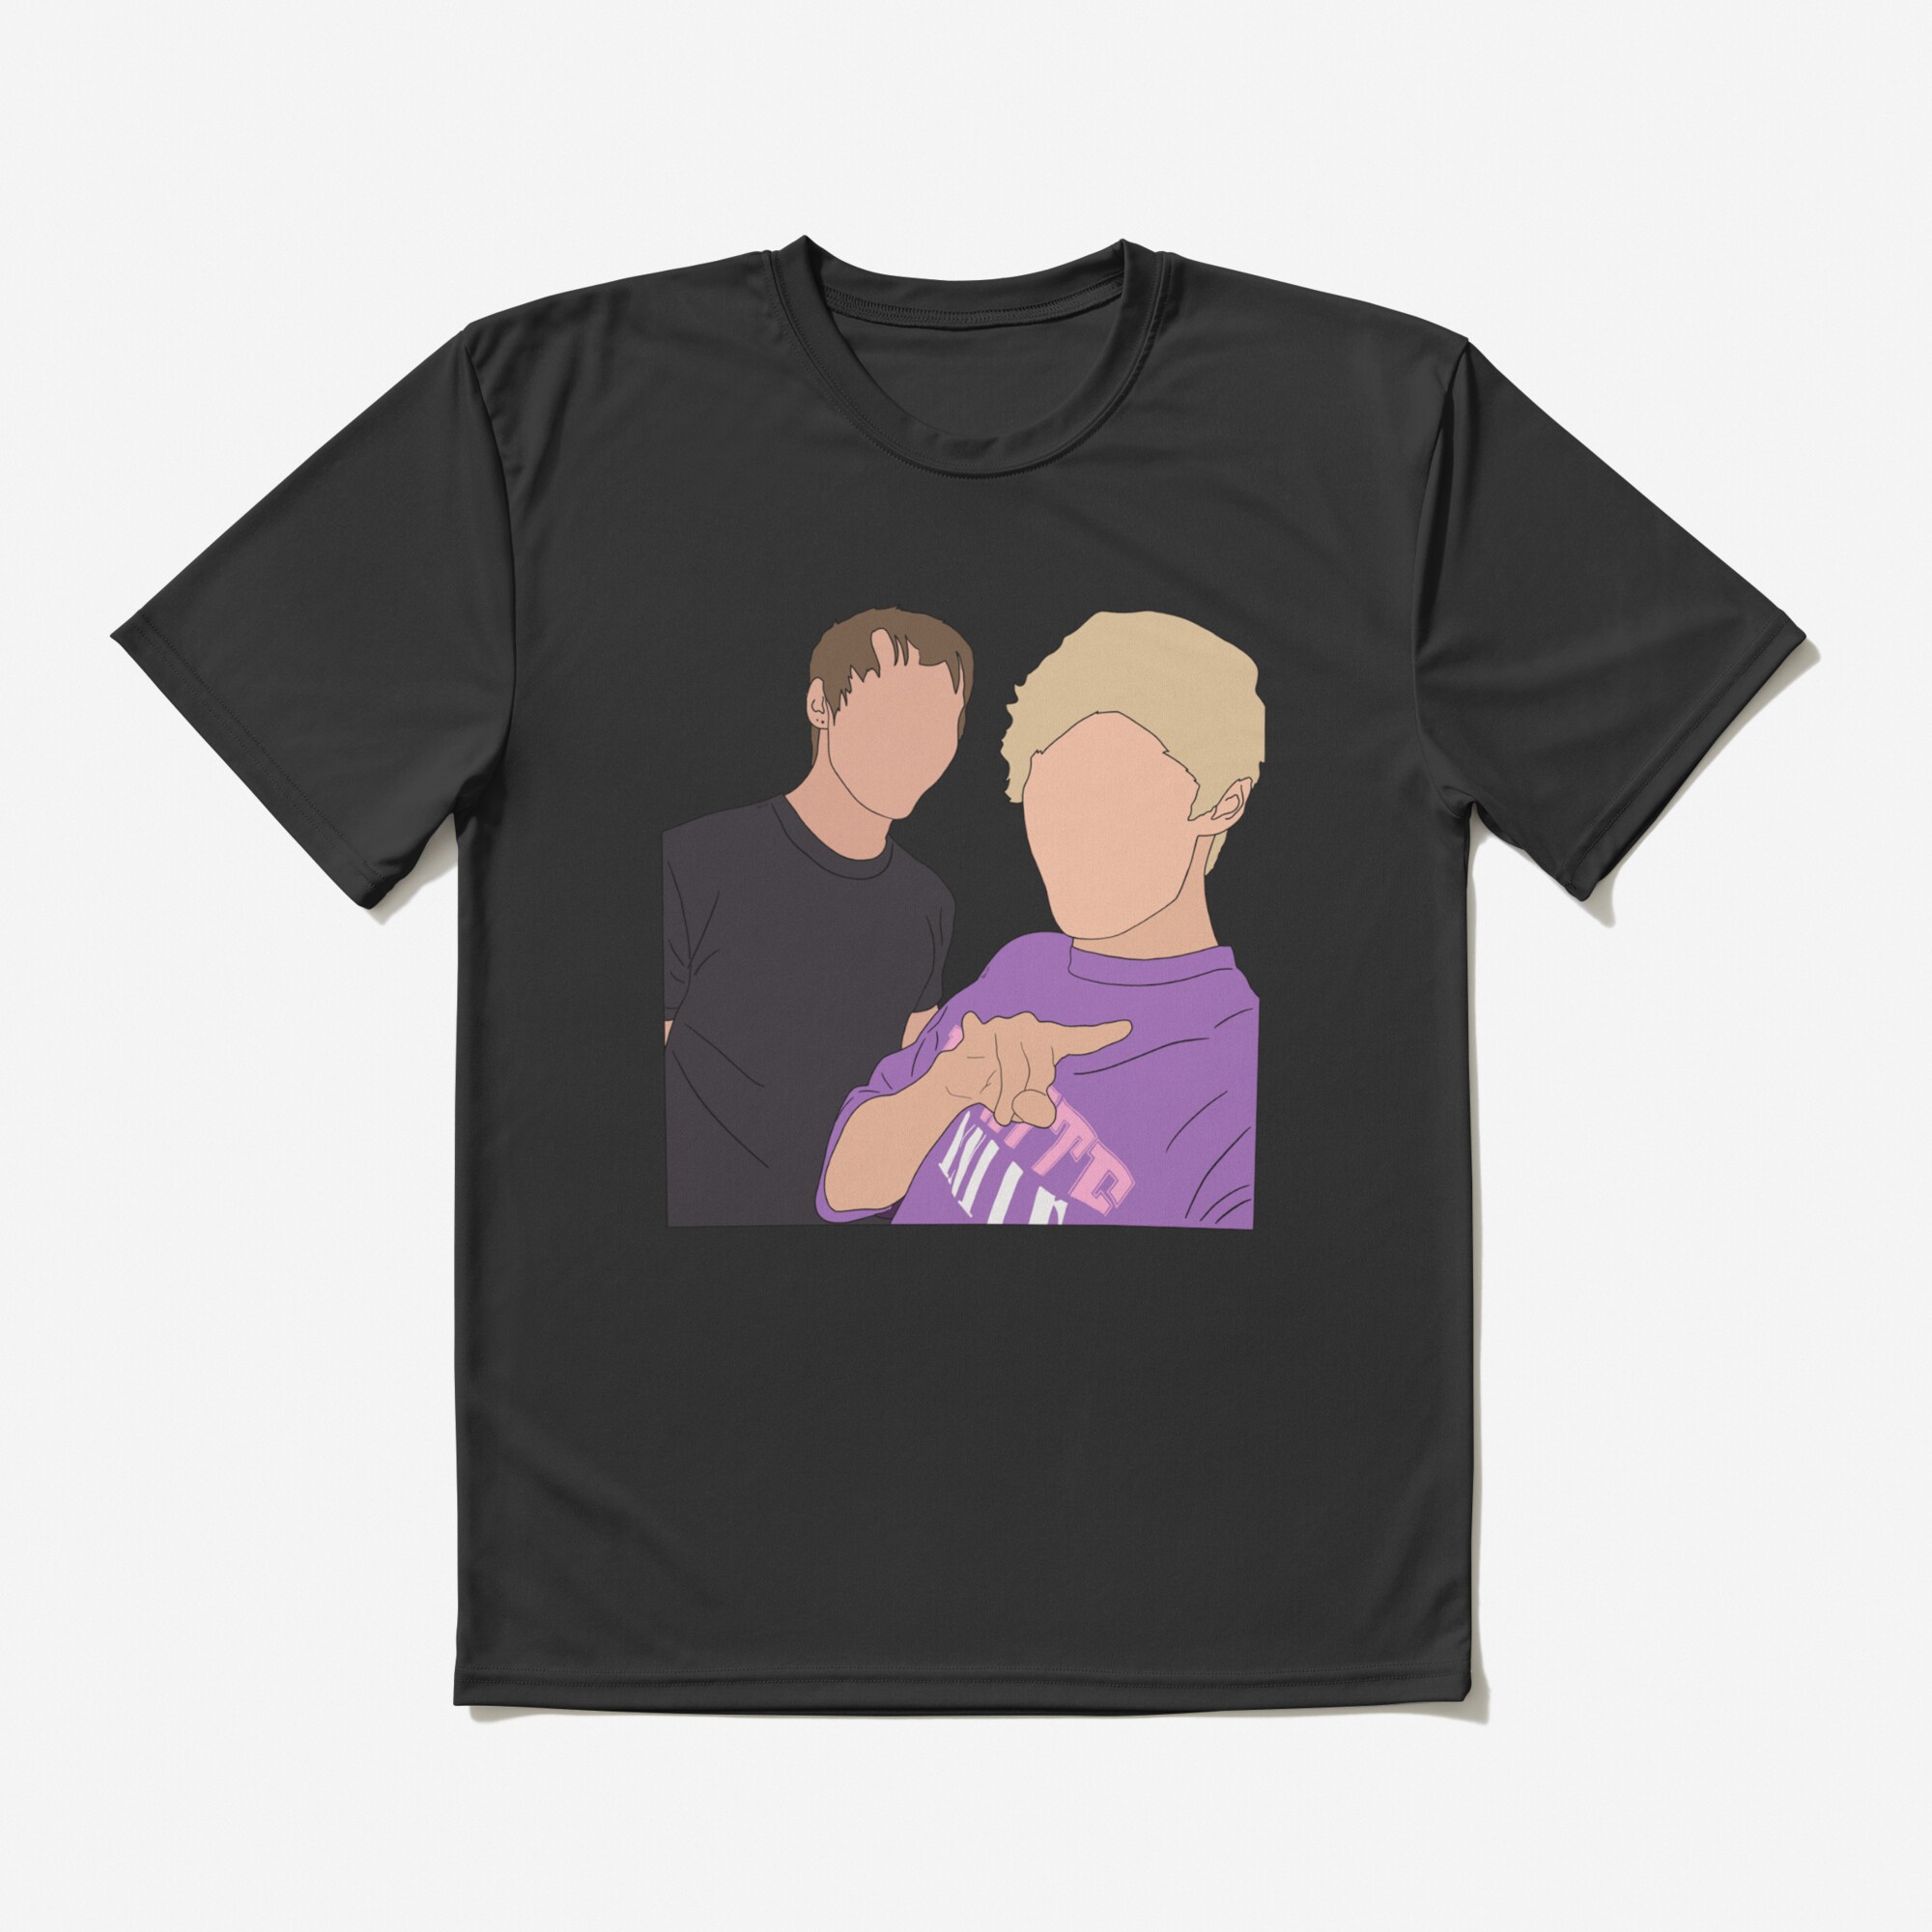 ssrcoactive tshirtflatlay10101001c5ca27c6frontsquare2000x2000 5 - Sam And Colby Shop